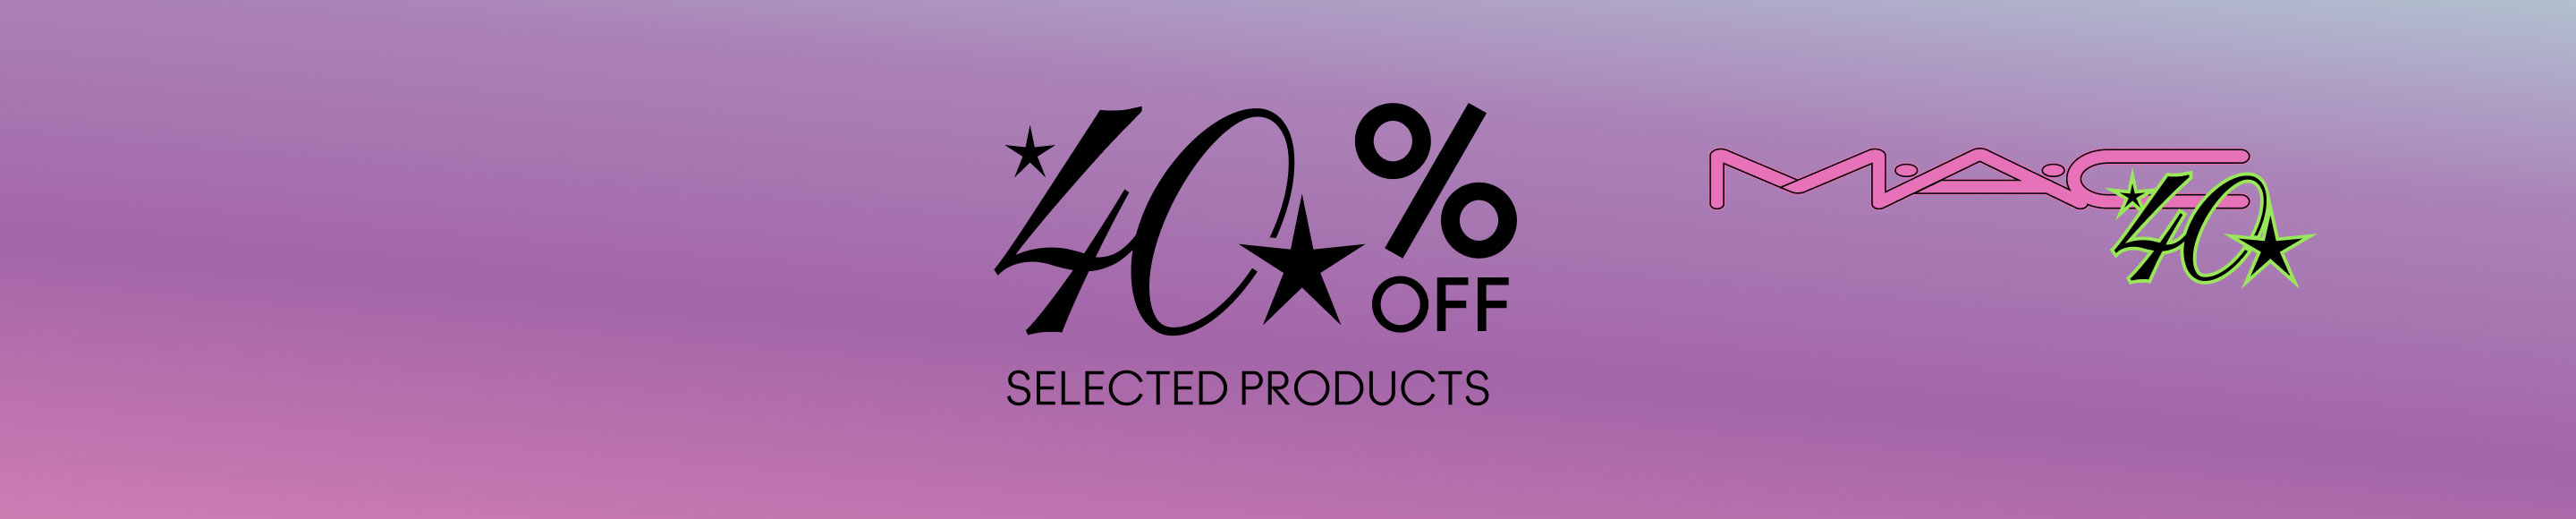 40% OFF SELECTED PRODUCTS